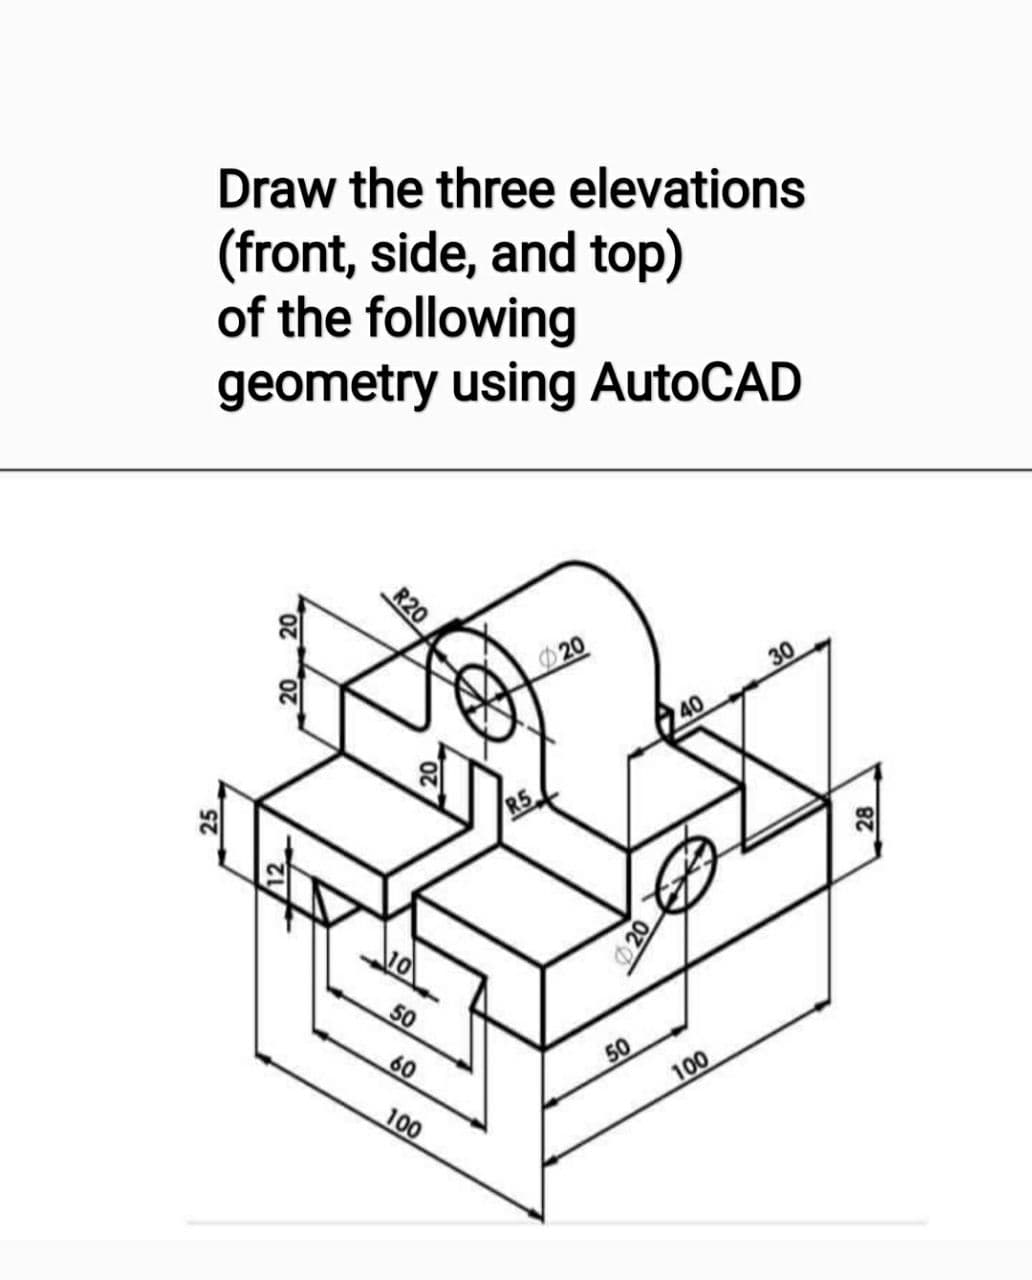 Draw the three elevations
(front, side, and top)
of the following
geometry using AutoCAD
20
30
Q40
10
50
60
50
100
100
R20
